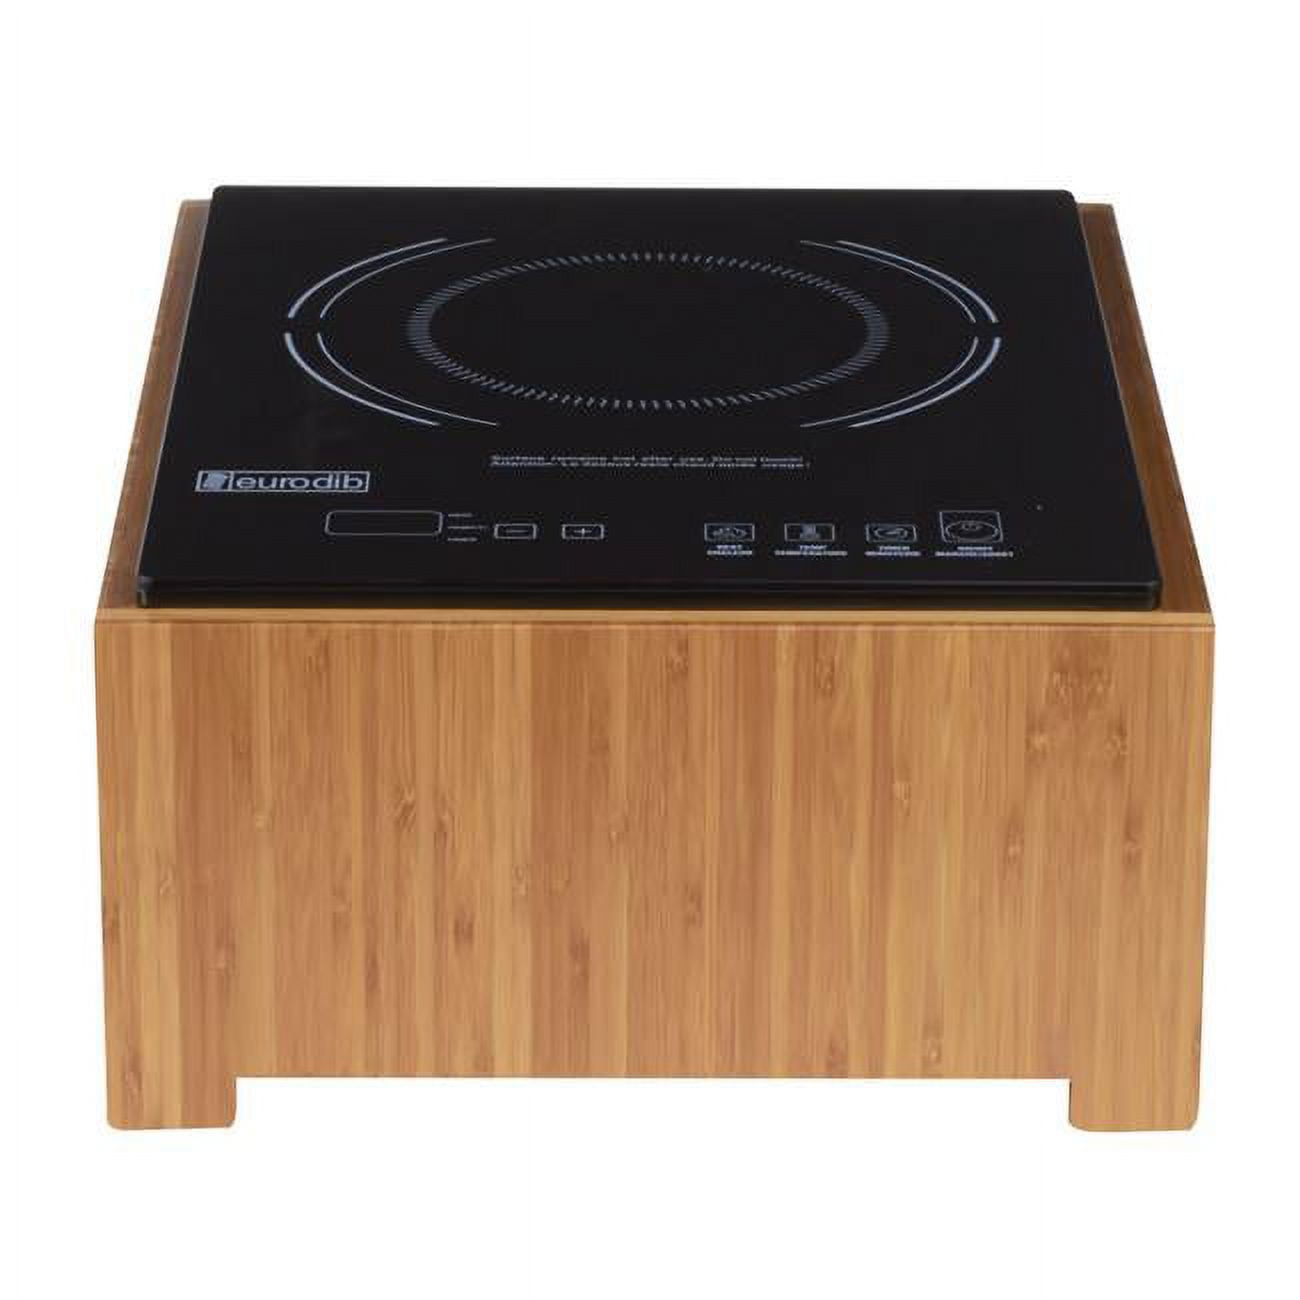 Picture of Cal Mil 3633-60 Bamboo Countertop Induction Cooker - 120V, 1600 watt - 12 x 12 x 6 in.